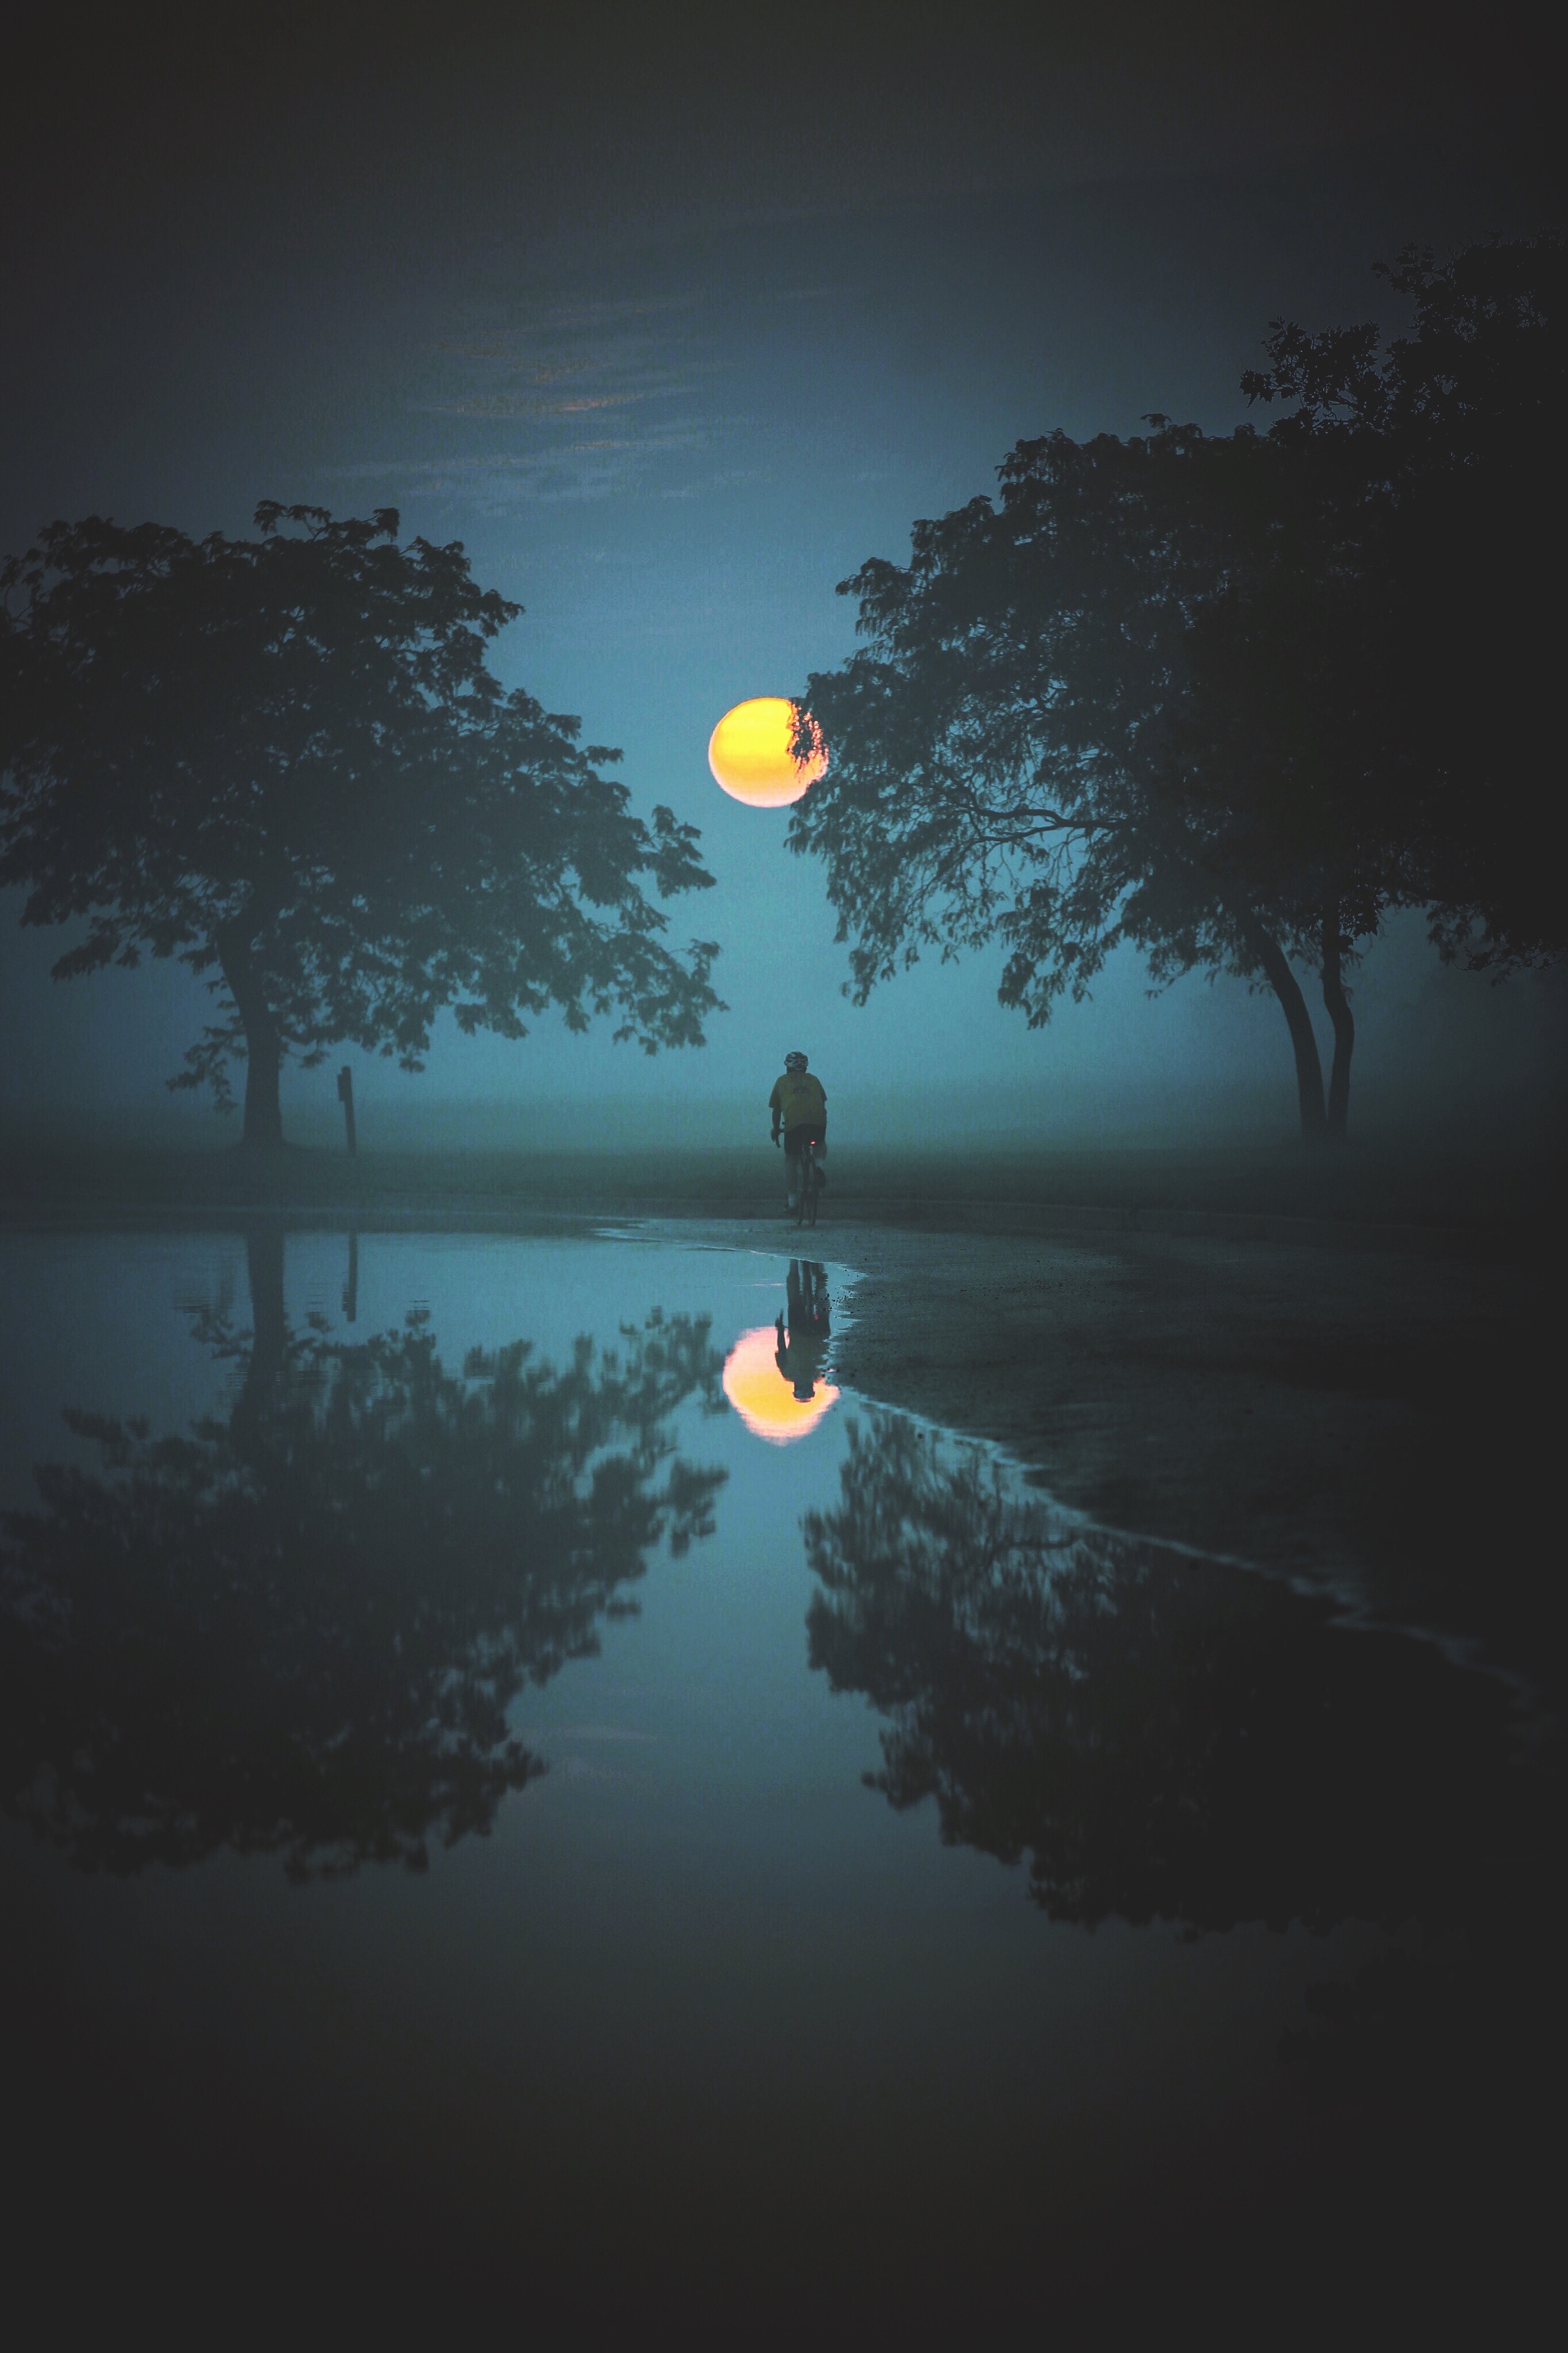 reflection, cyclist, moon, nature, water, trees, fog for android